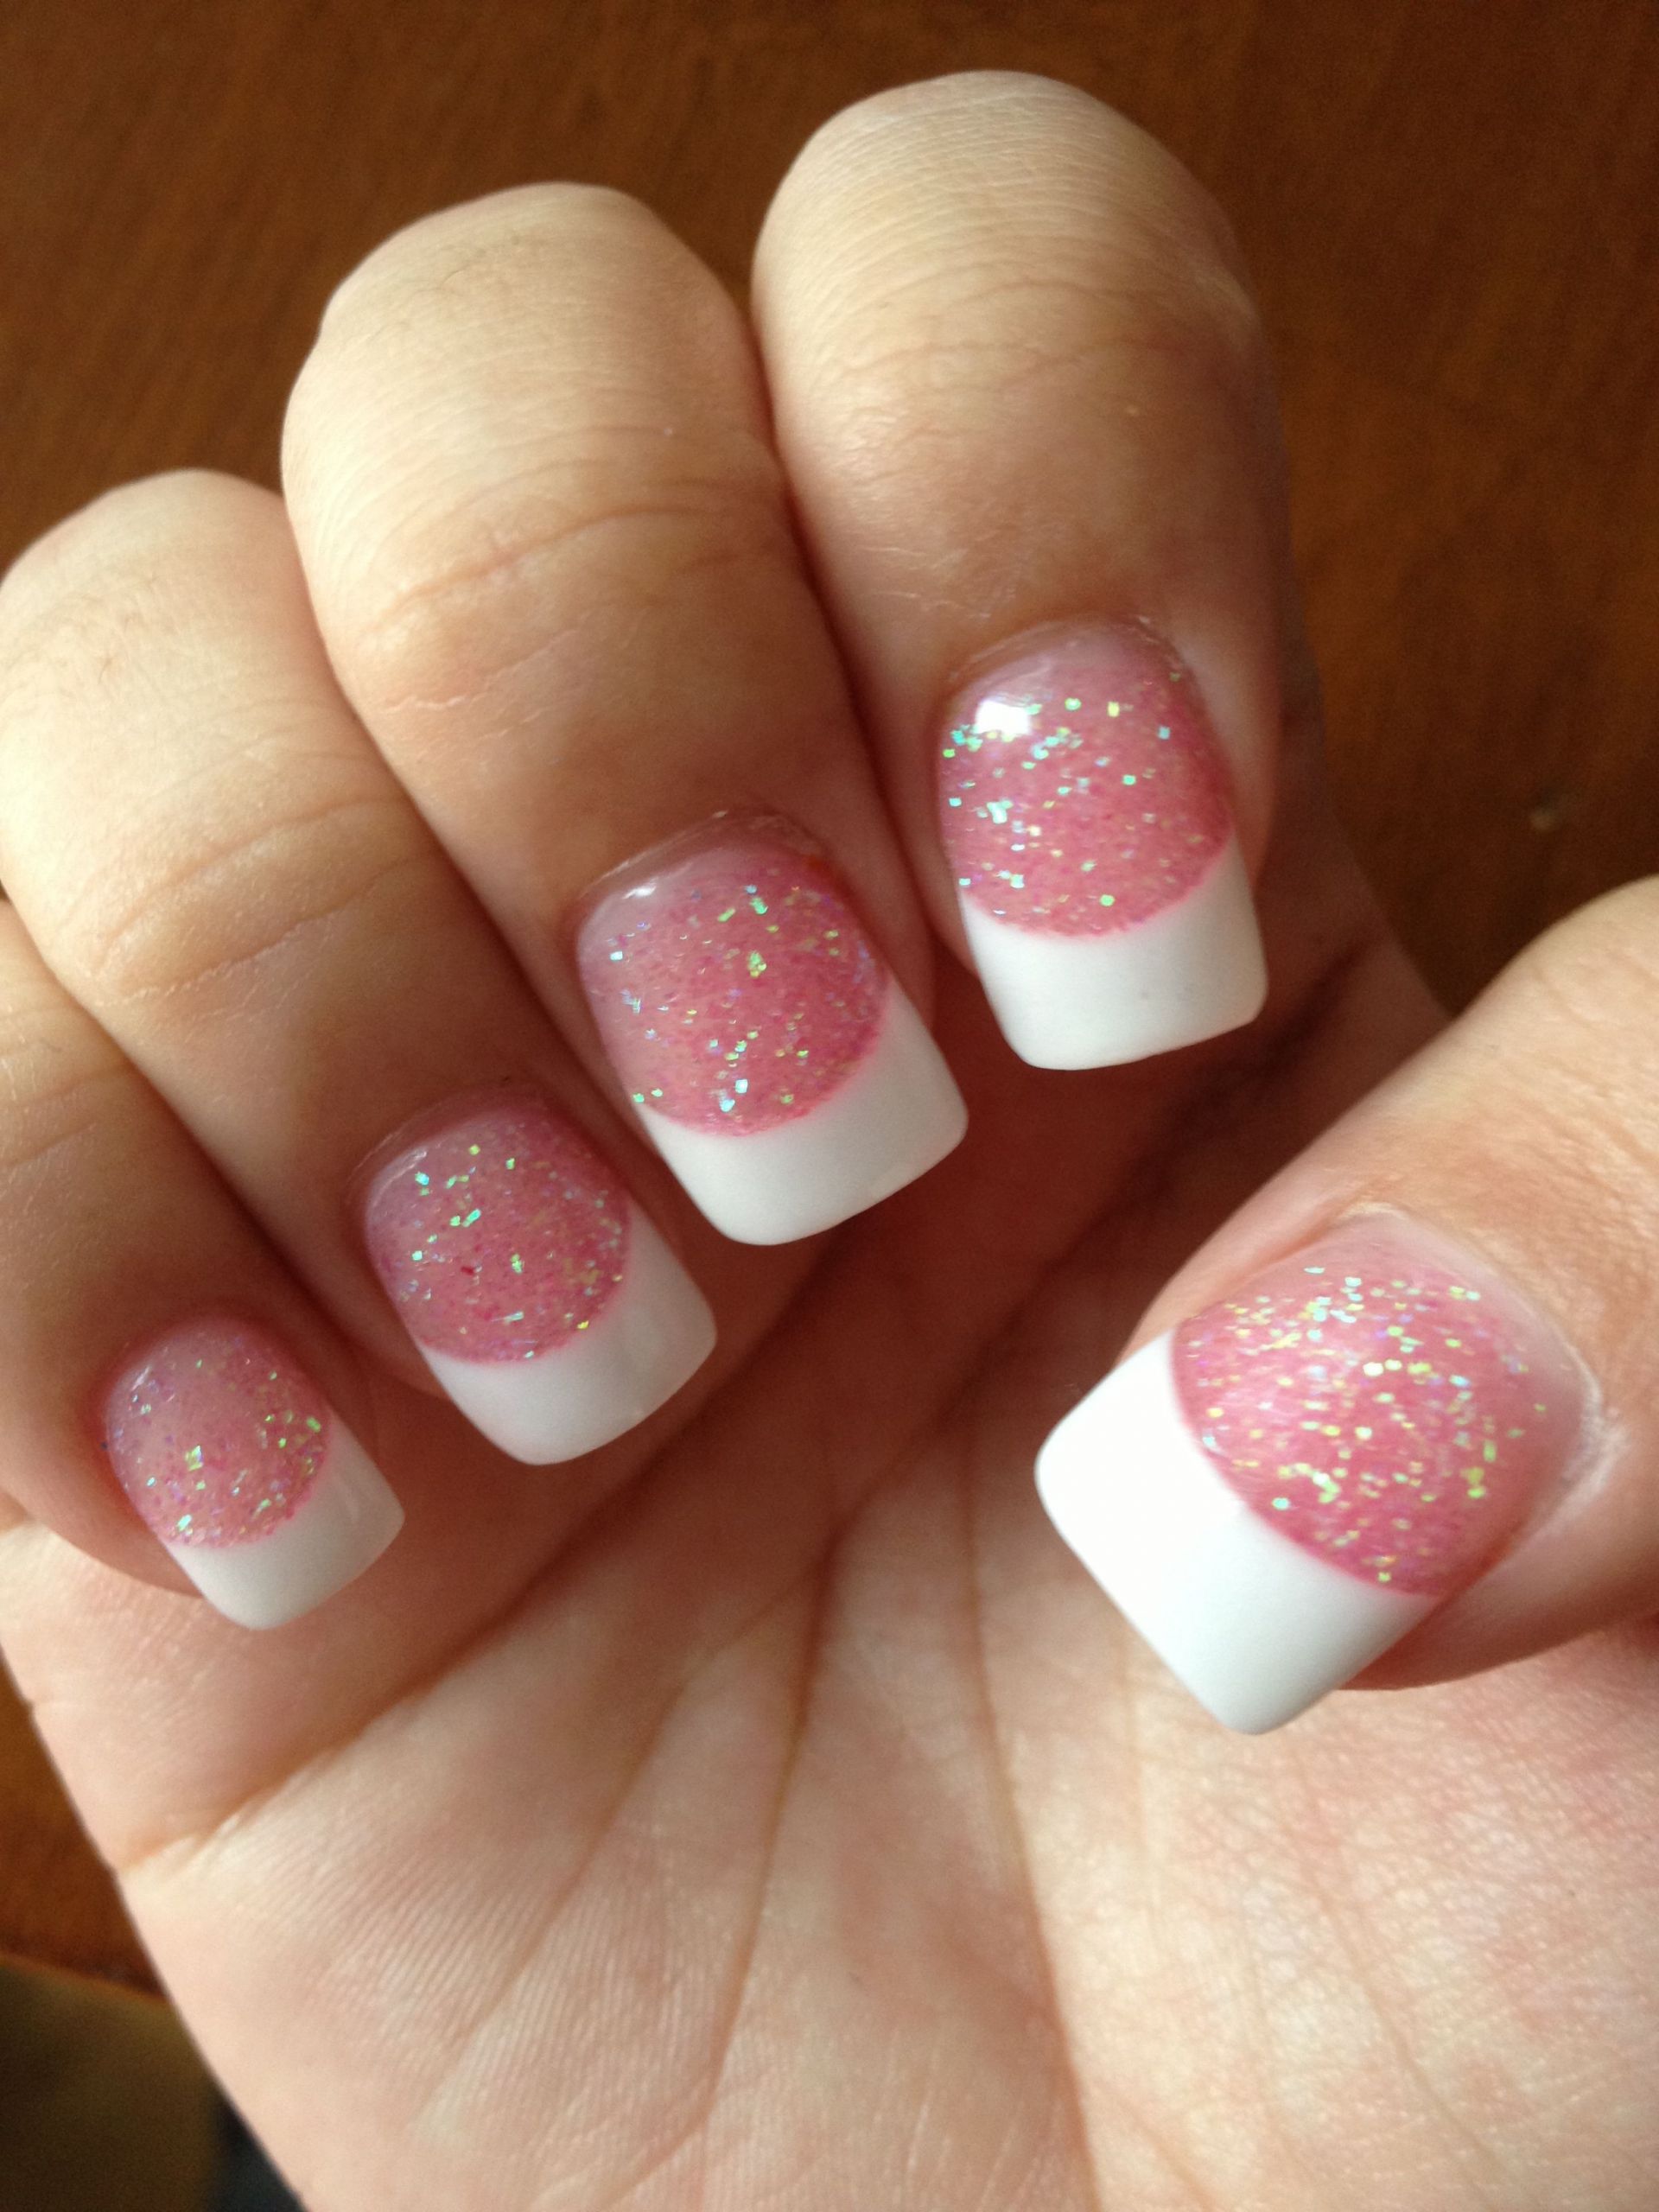 Pink Nails With Glitter Tips
 Acrylic nails white tip with pink glitter base